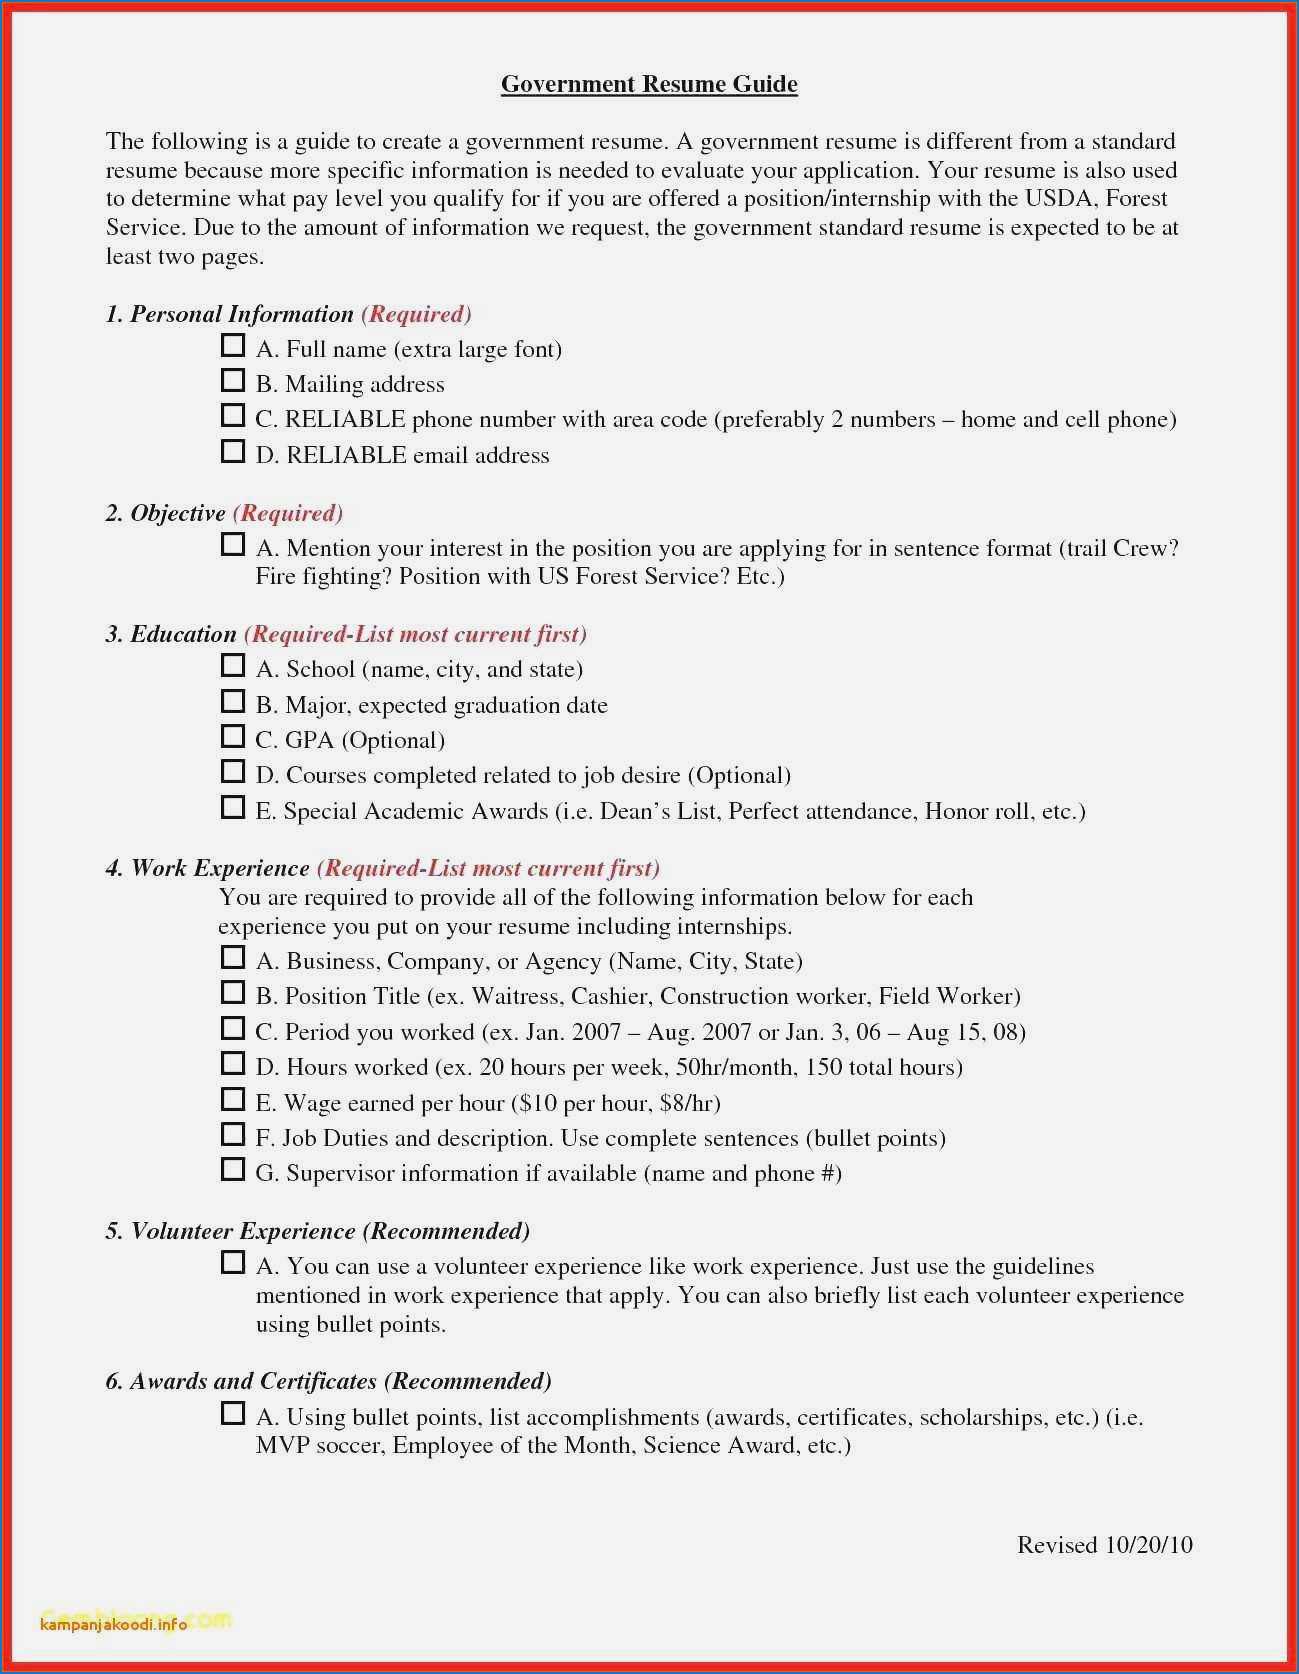 Honor Roll Certificate Template New B Honor Roll Certificate In Honor Roll Certificate Template